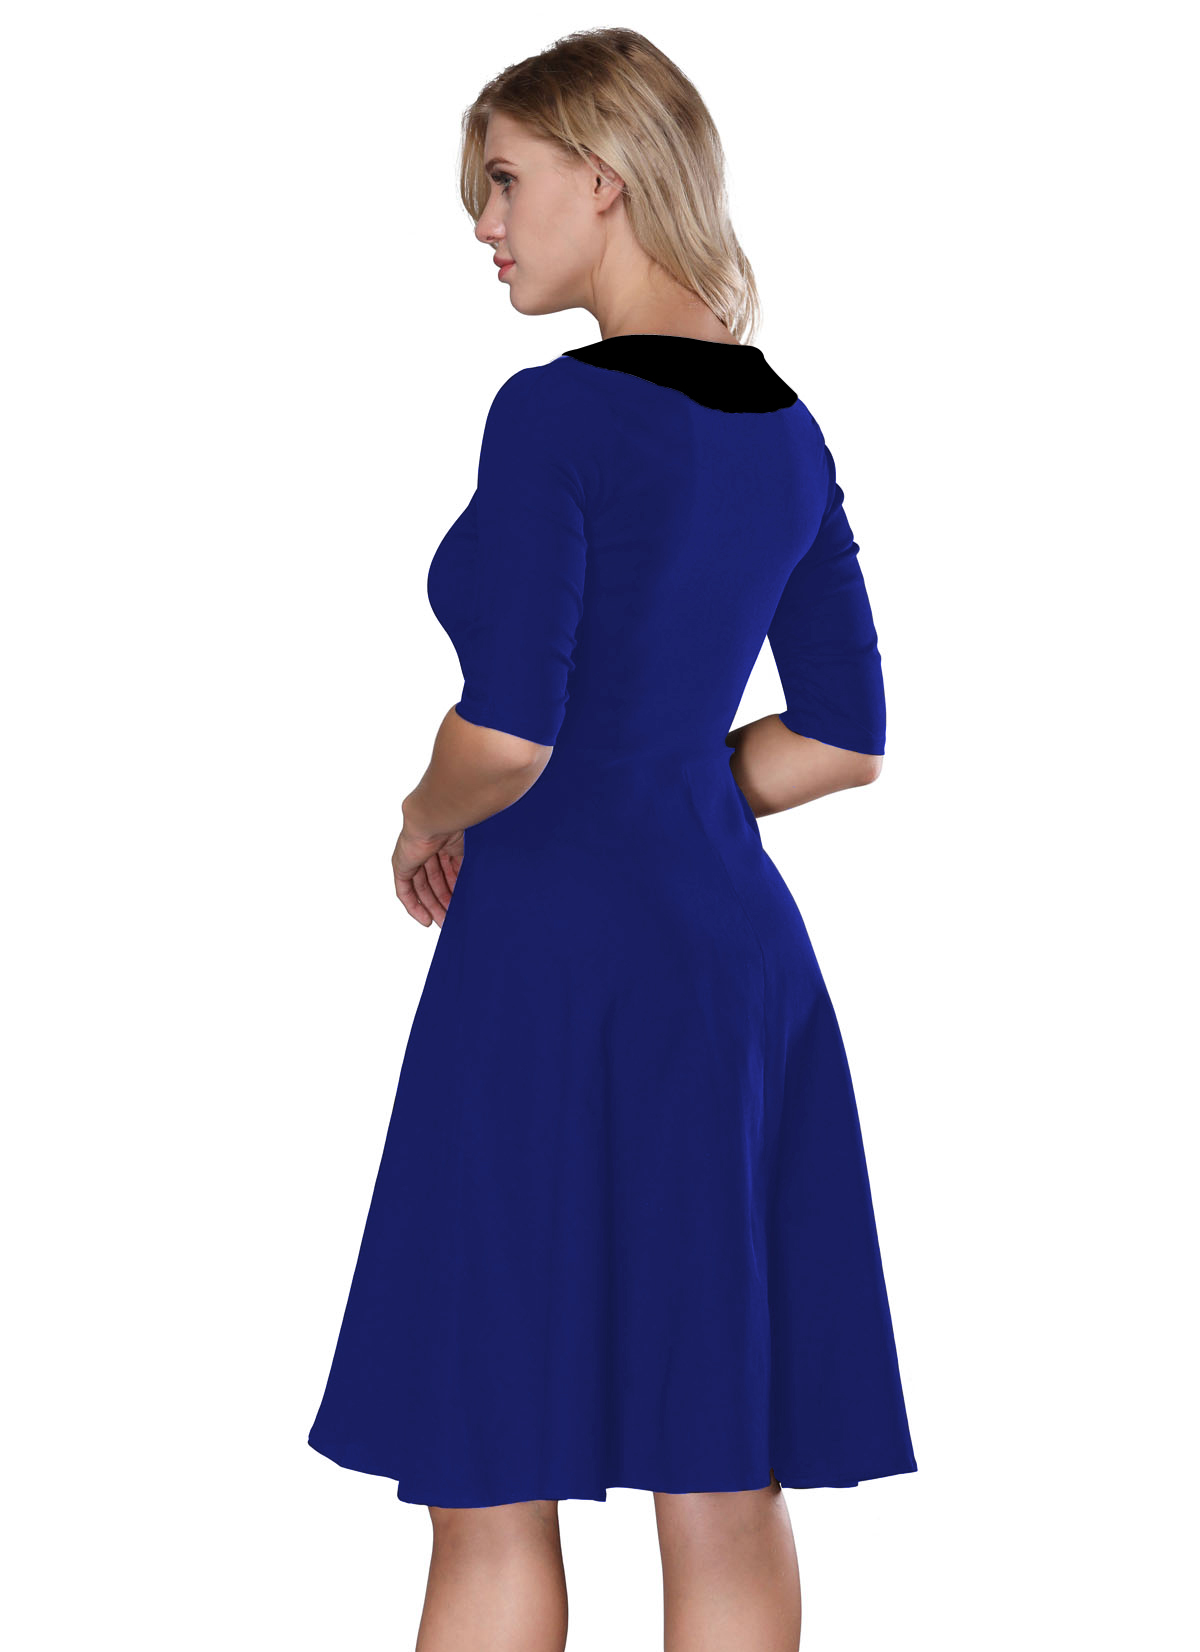 F2529-3 Womens Vintage 1950s Cape Collar Swing Midi Cocktail Party Dresses